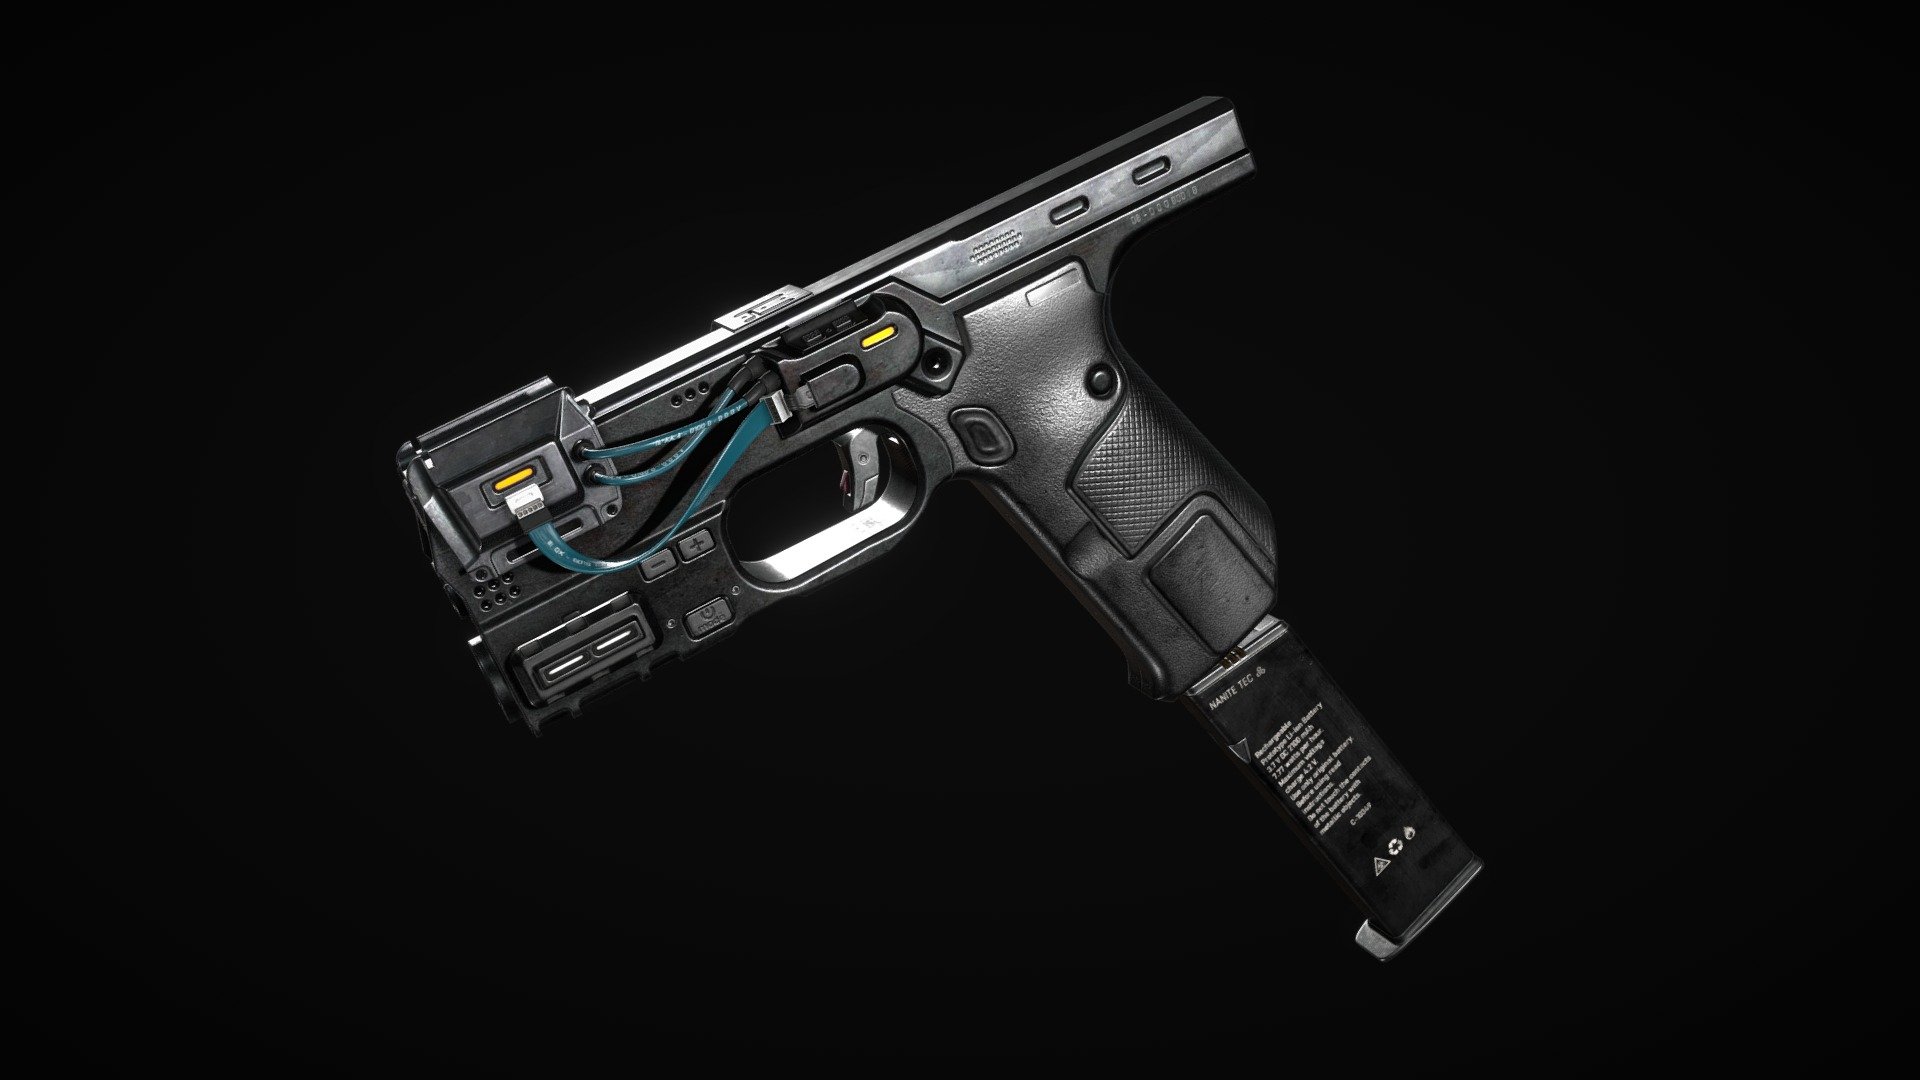 Laser handgun by random concept art from the internet
I've been wanting to do some sci-fi asset for a long time, especially weapon.

Tris:
Mag(Battery): 1234
All hgun: 24 245
Total: 25 479

Textures Spec/Gloss:
All gun: 1 x 2048x2048
Transparent parts: 1 x 512x512

Texel: 137px/in (54px/cm) - Sci-Fi Laser pistol "PLS - 89" - 3D model by Denis (Knifectol) Shevelev (@knifectol) 3d model